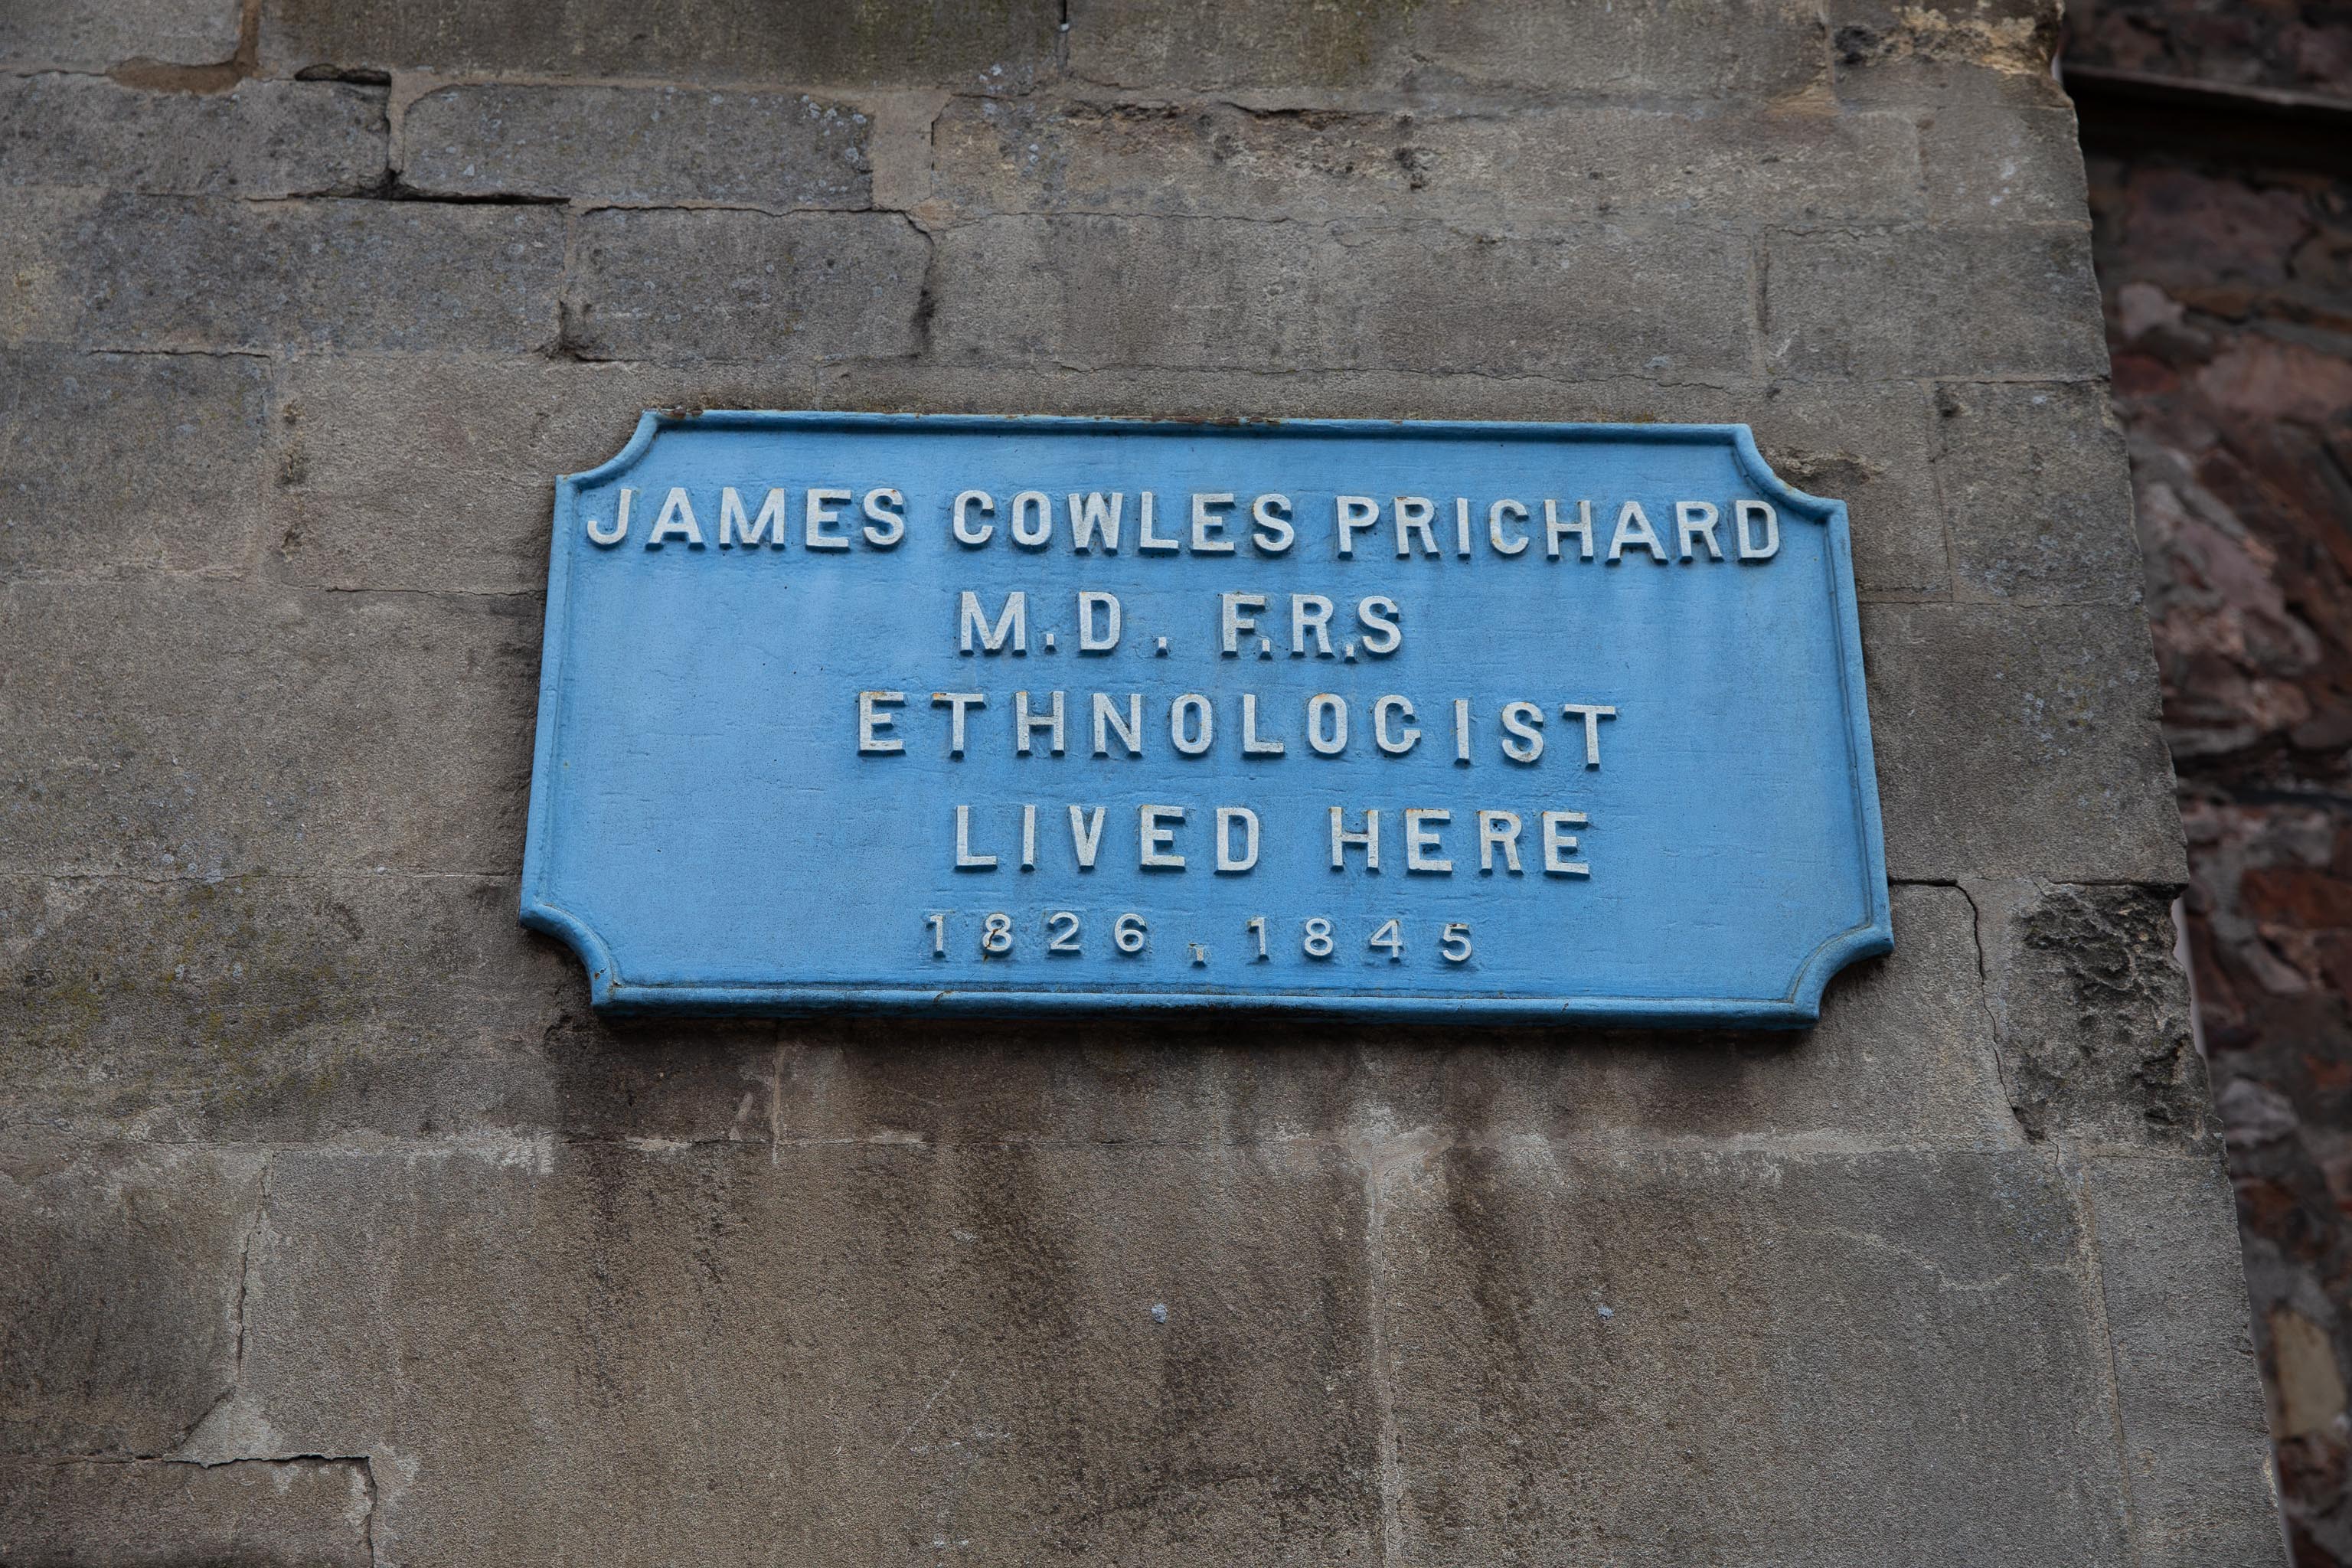 James Cowles Prichard
As well as ethnology, James Cowles Prichard was a psychiatric pioneer, serving as the—believe it or not—Commissioner for Lunacy, and was also the f...